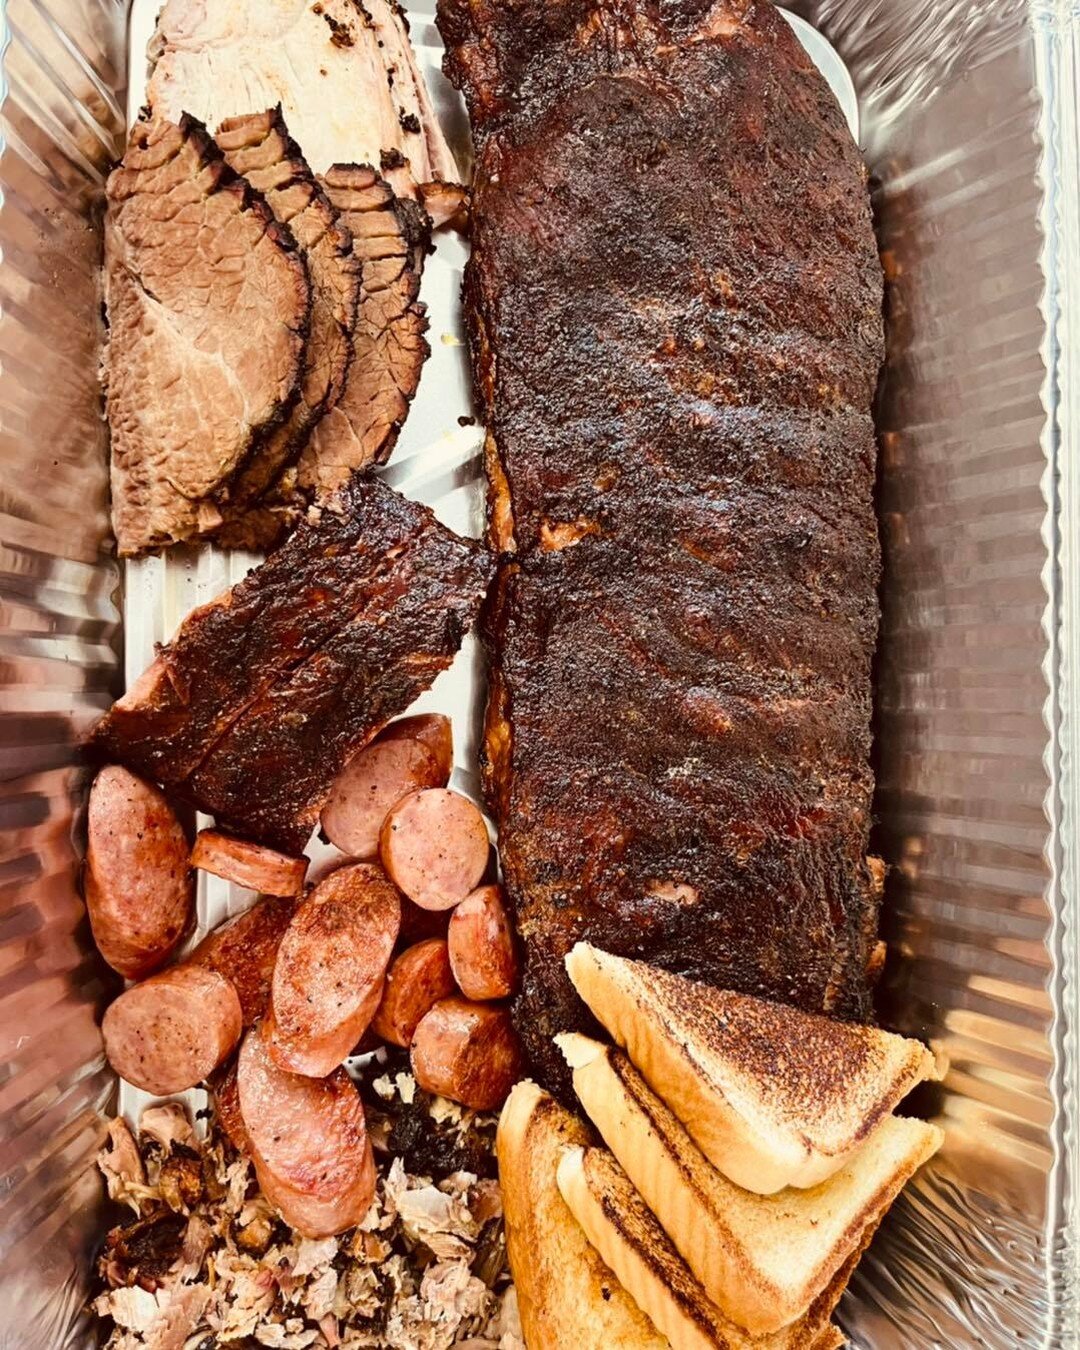 I&rsquo;ve heard that &ldquo;Texas Mom&rsquo;s&rdquo; prefer BBQ over flowers. Just sayin.&rsquo;

Preorder your Mother&rsquo;s Day meal at 903-432-9000!

#bbq #bbqlovers #texasbbq #easttexas #cedarcreeklaketx #cedarcreeklake #smokedmeat #mothersday